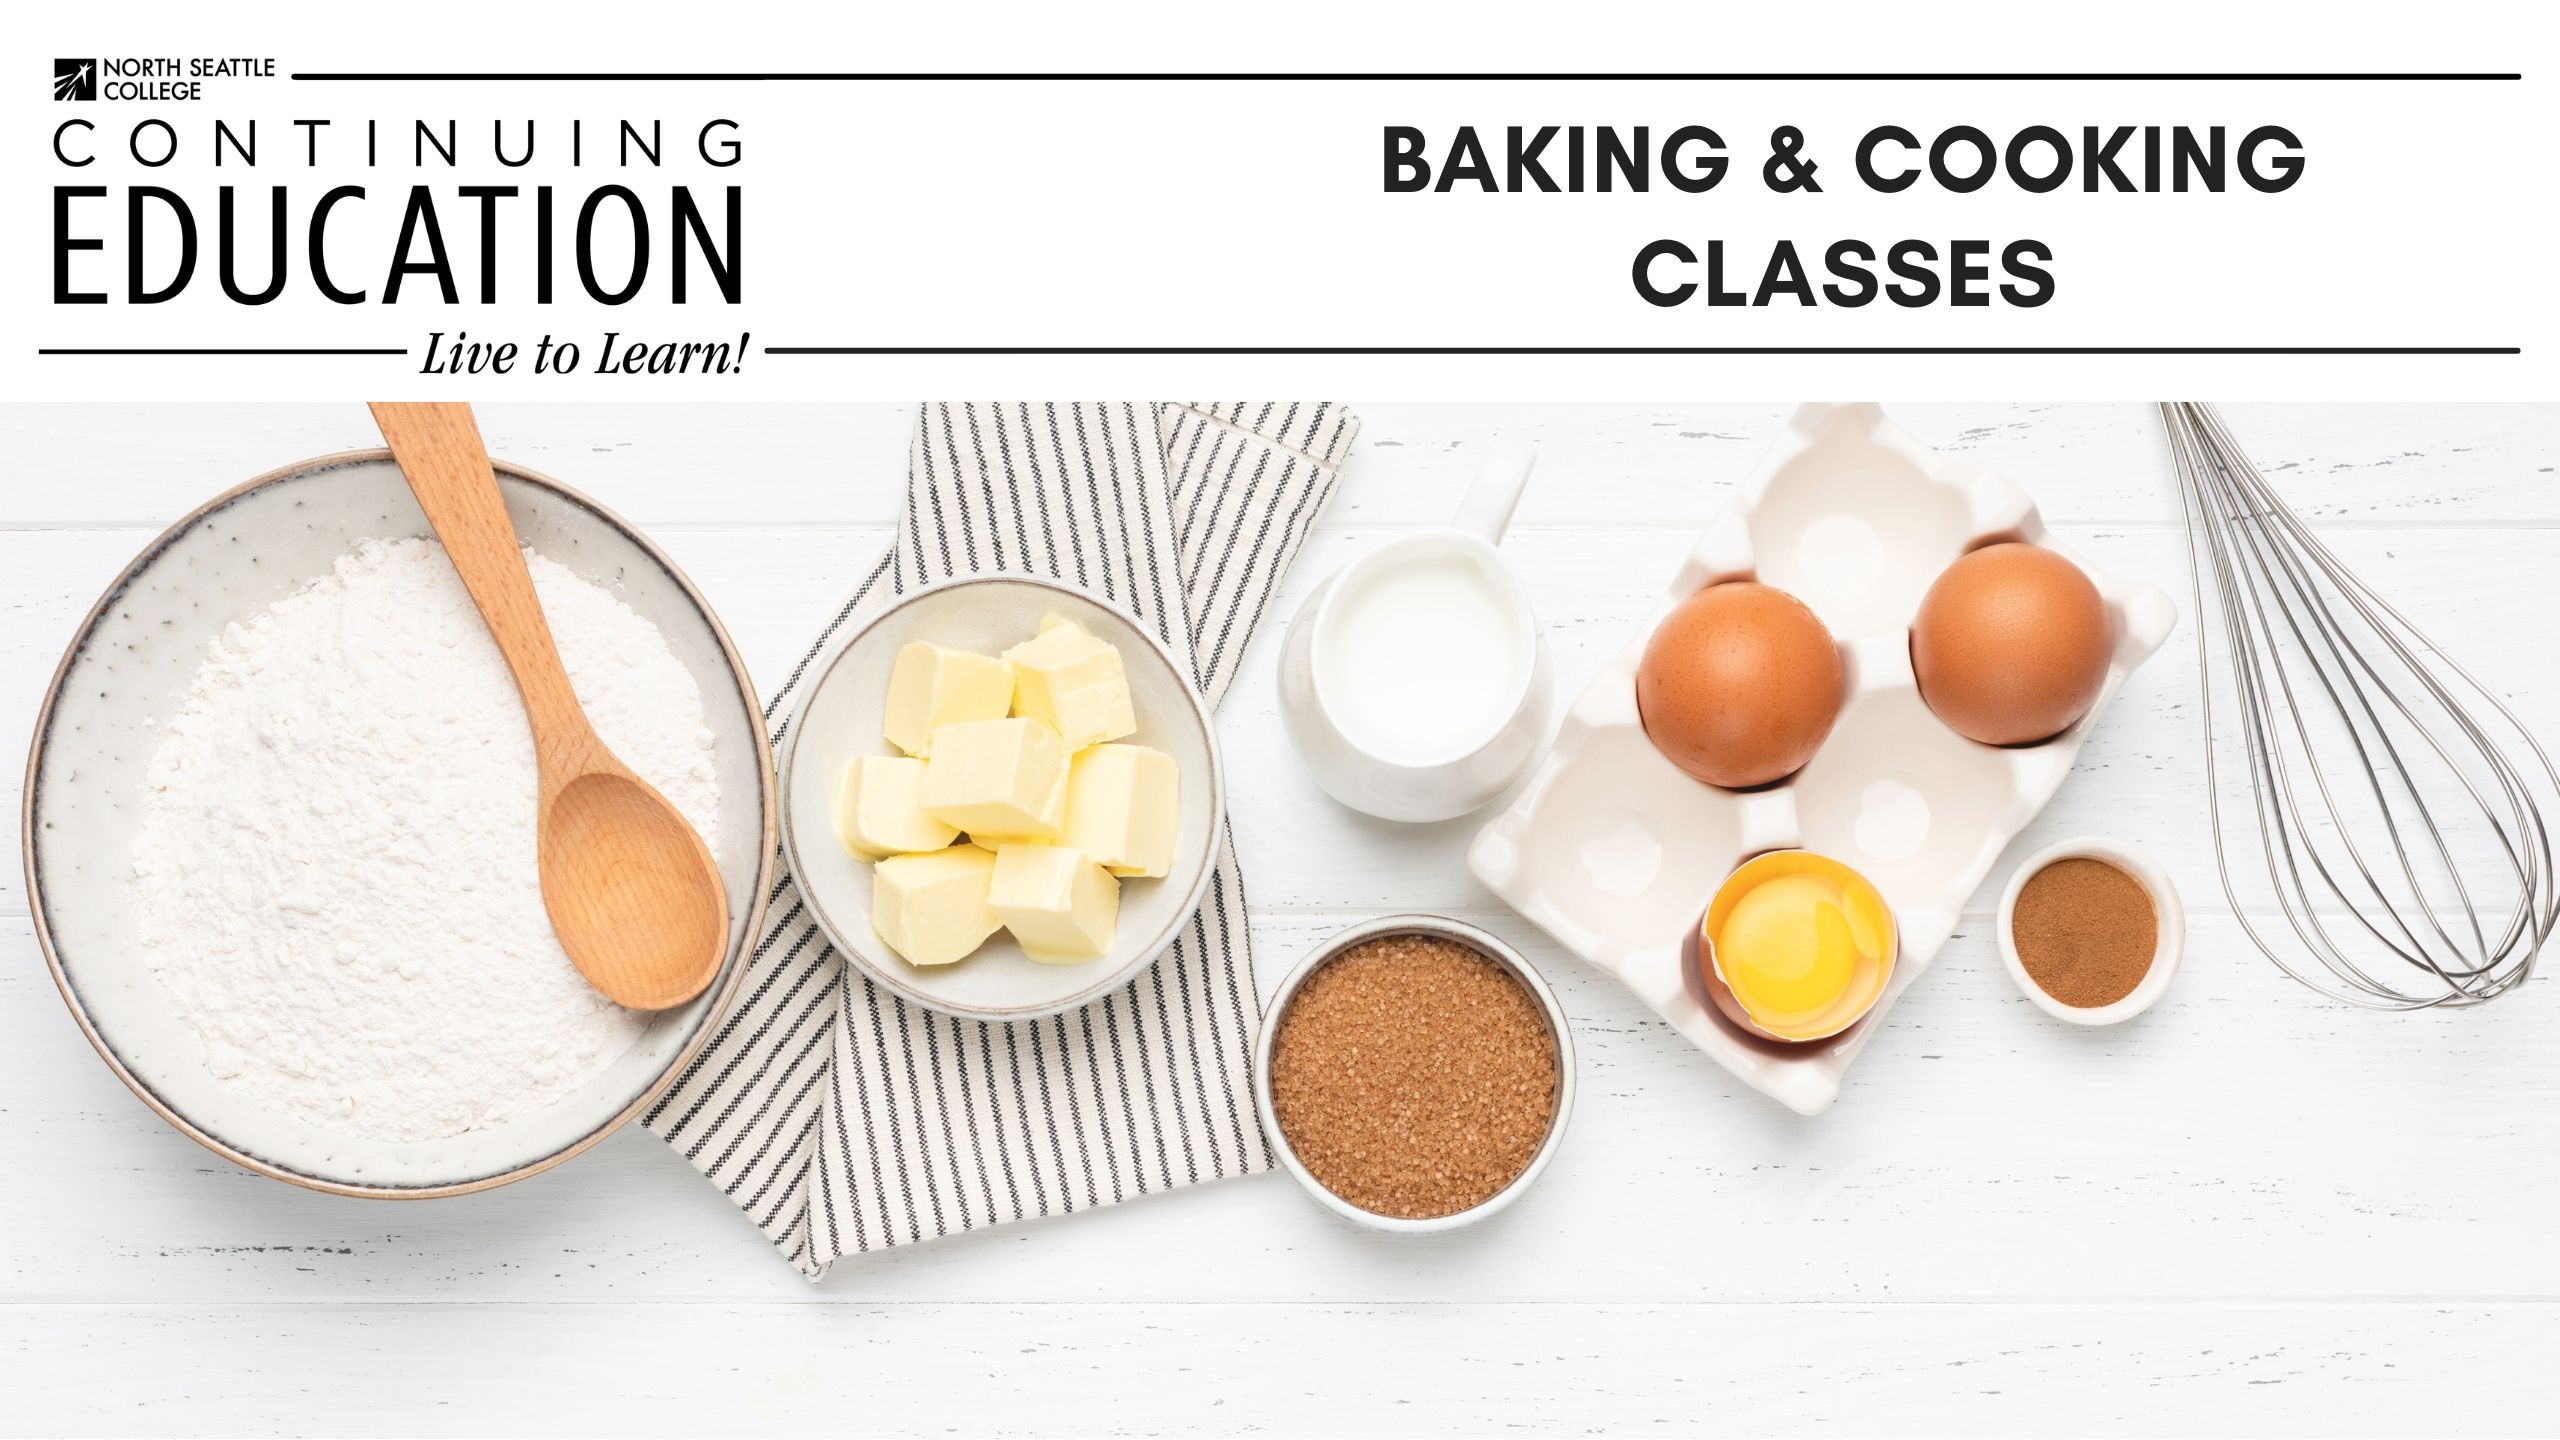 Baking & Cooking Classes